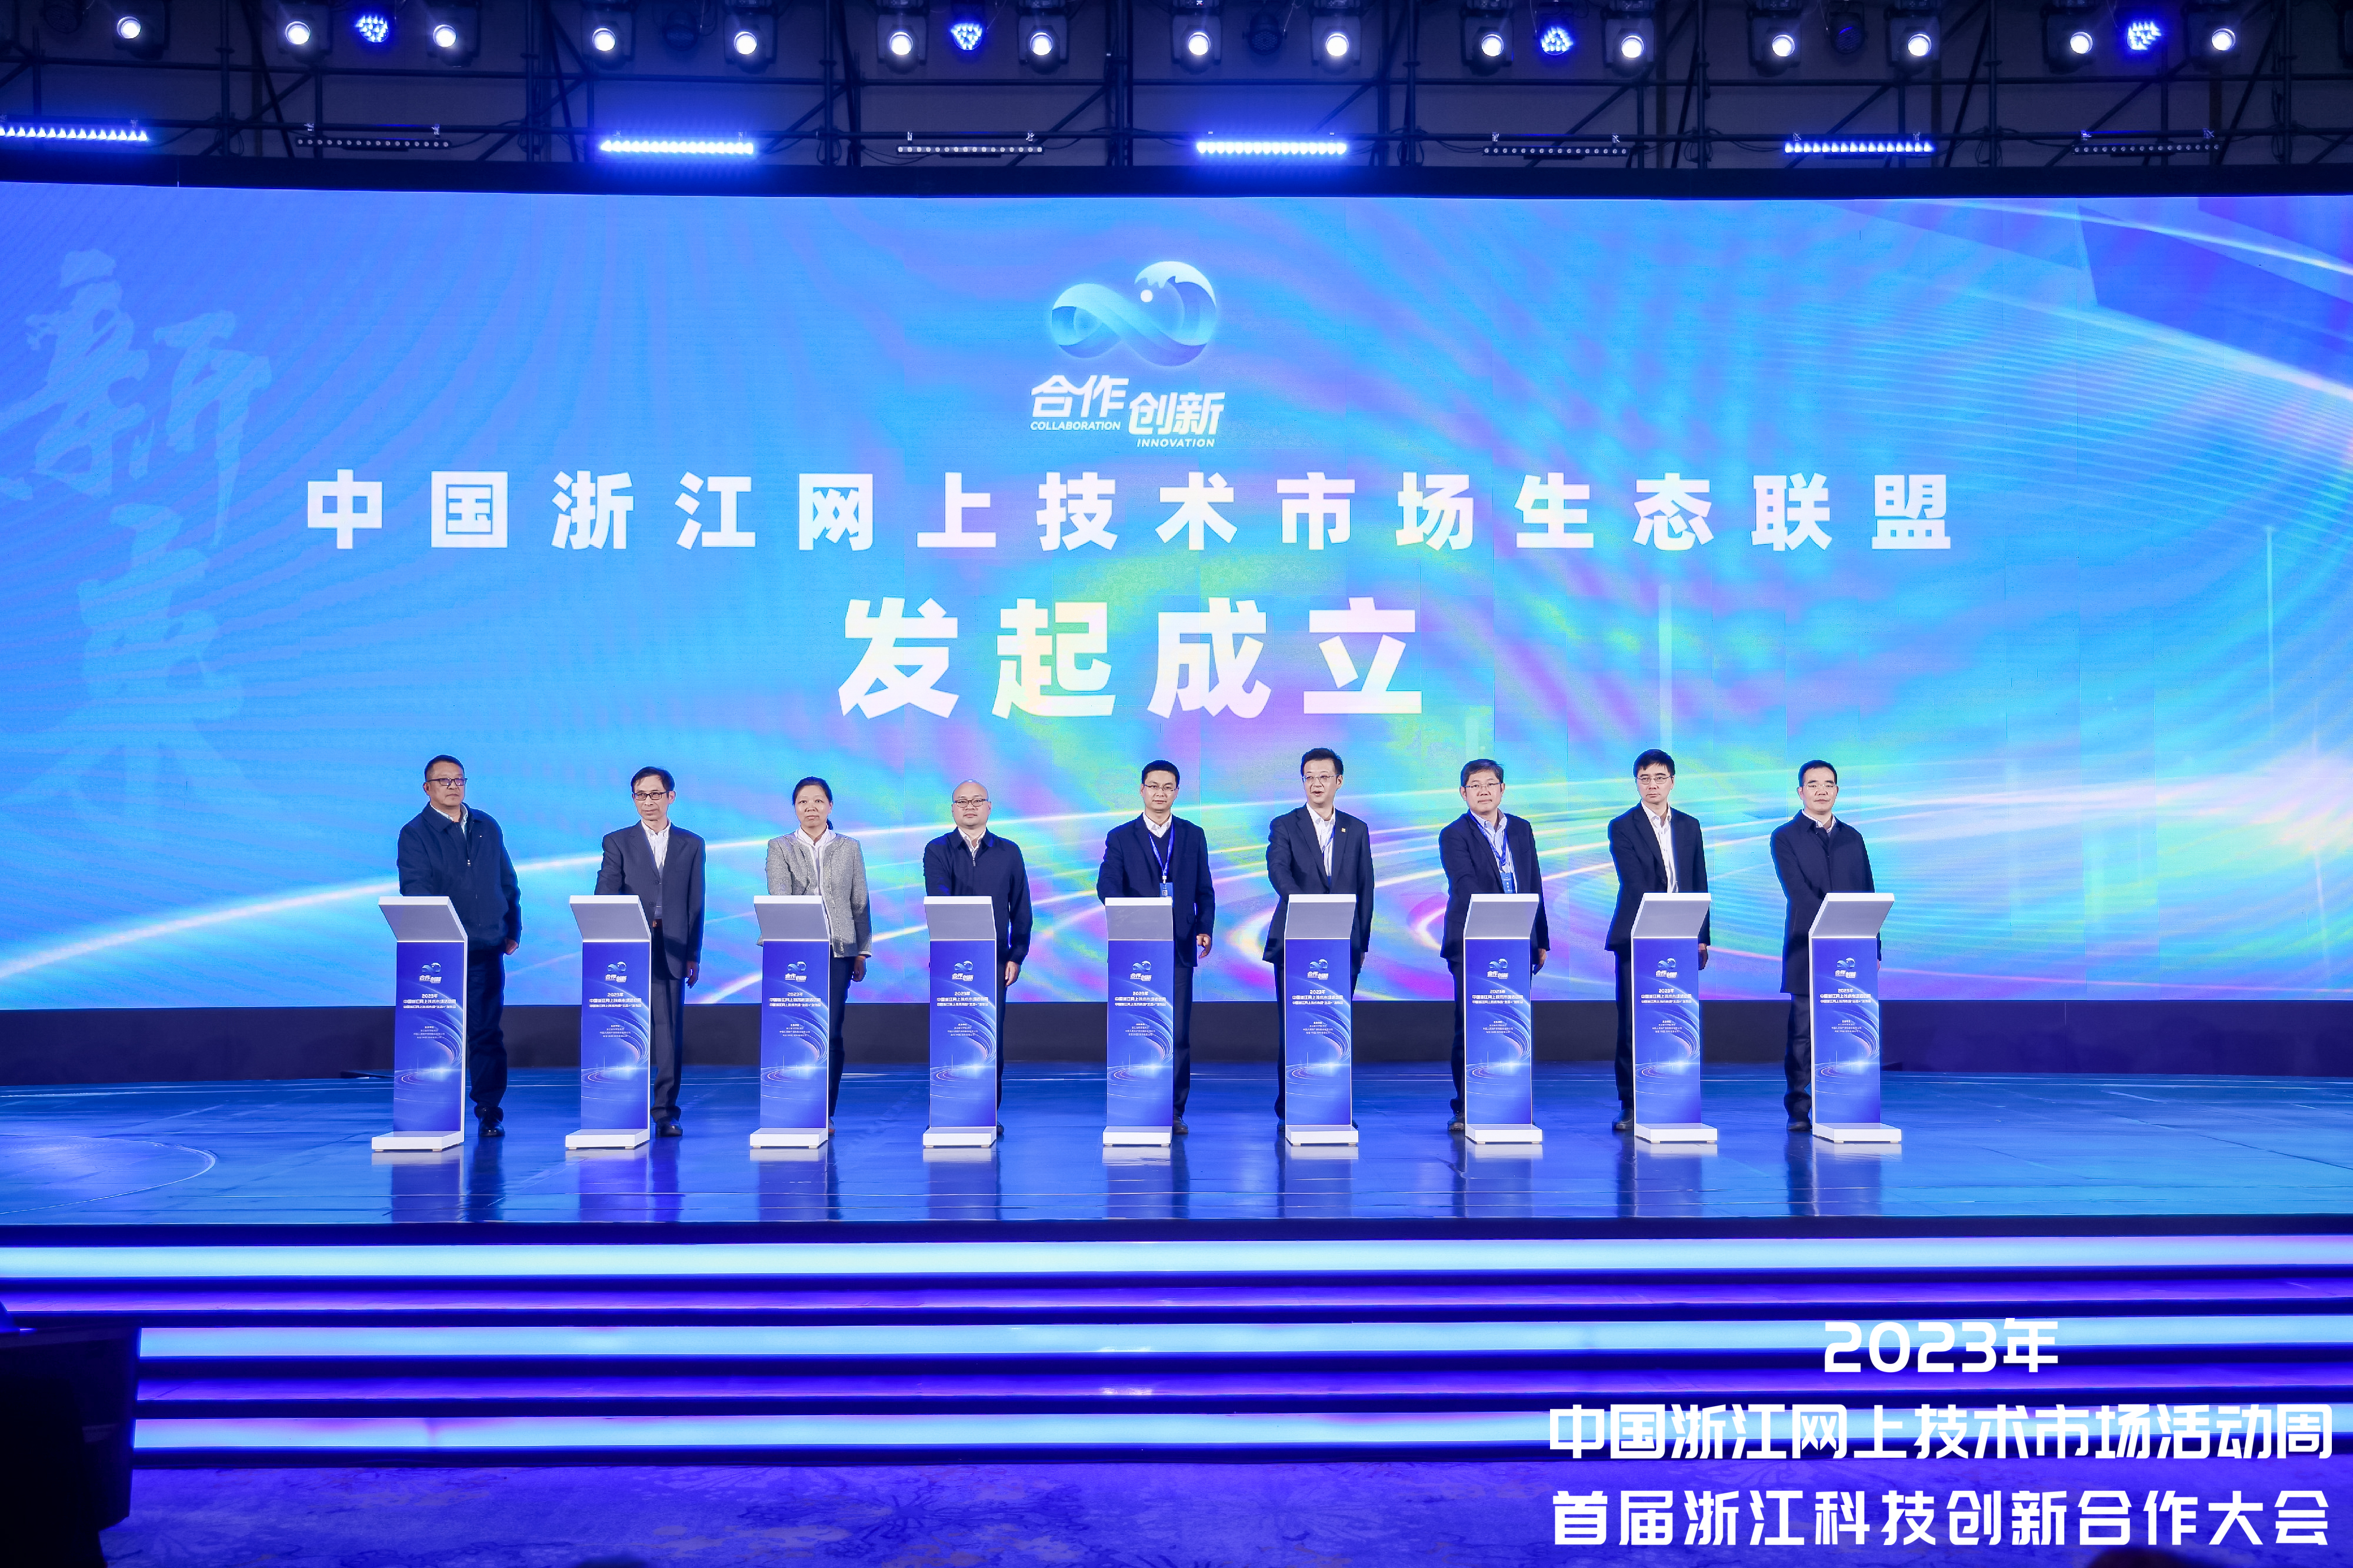 The first Zhejiang Science and Technology Innovation Cooperation Conference of Zhejiang Science and Technology Innovation Cooperation for Scientific Research Achievements was held